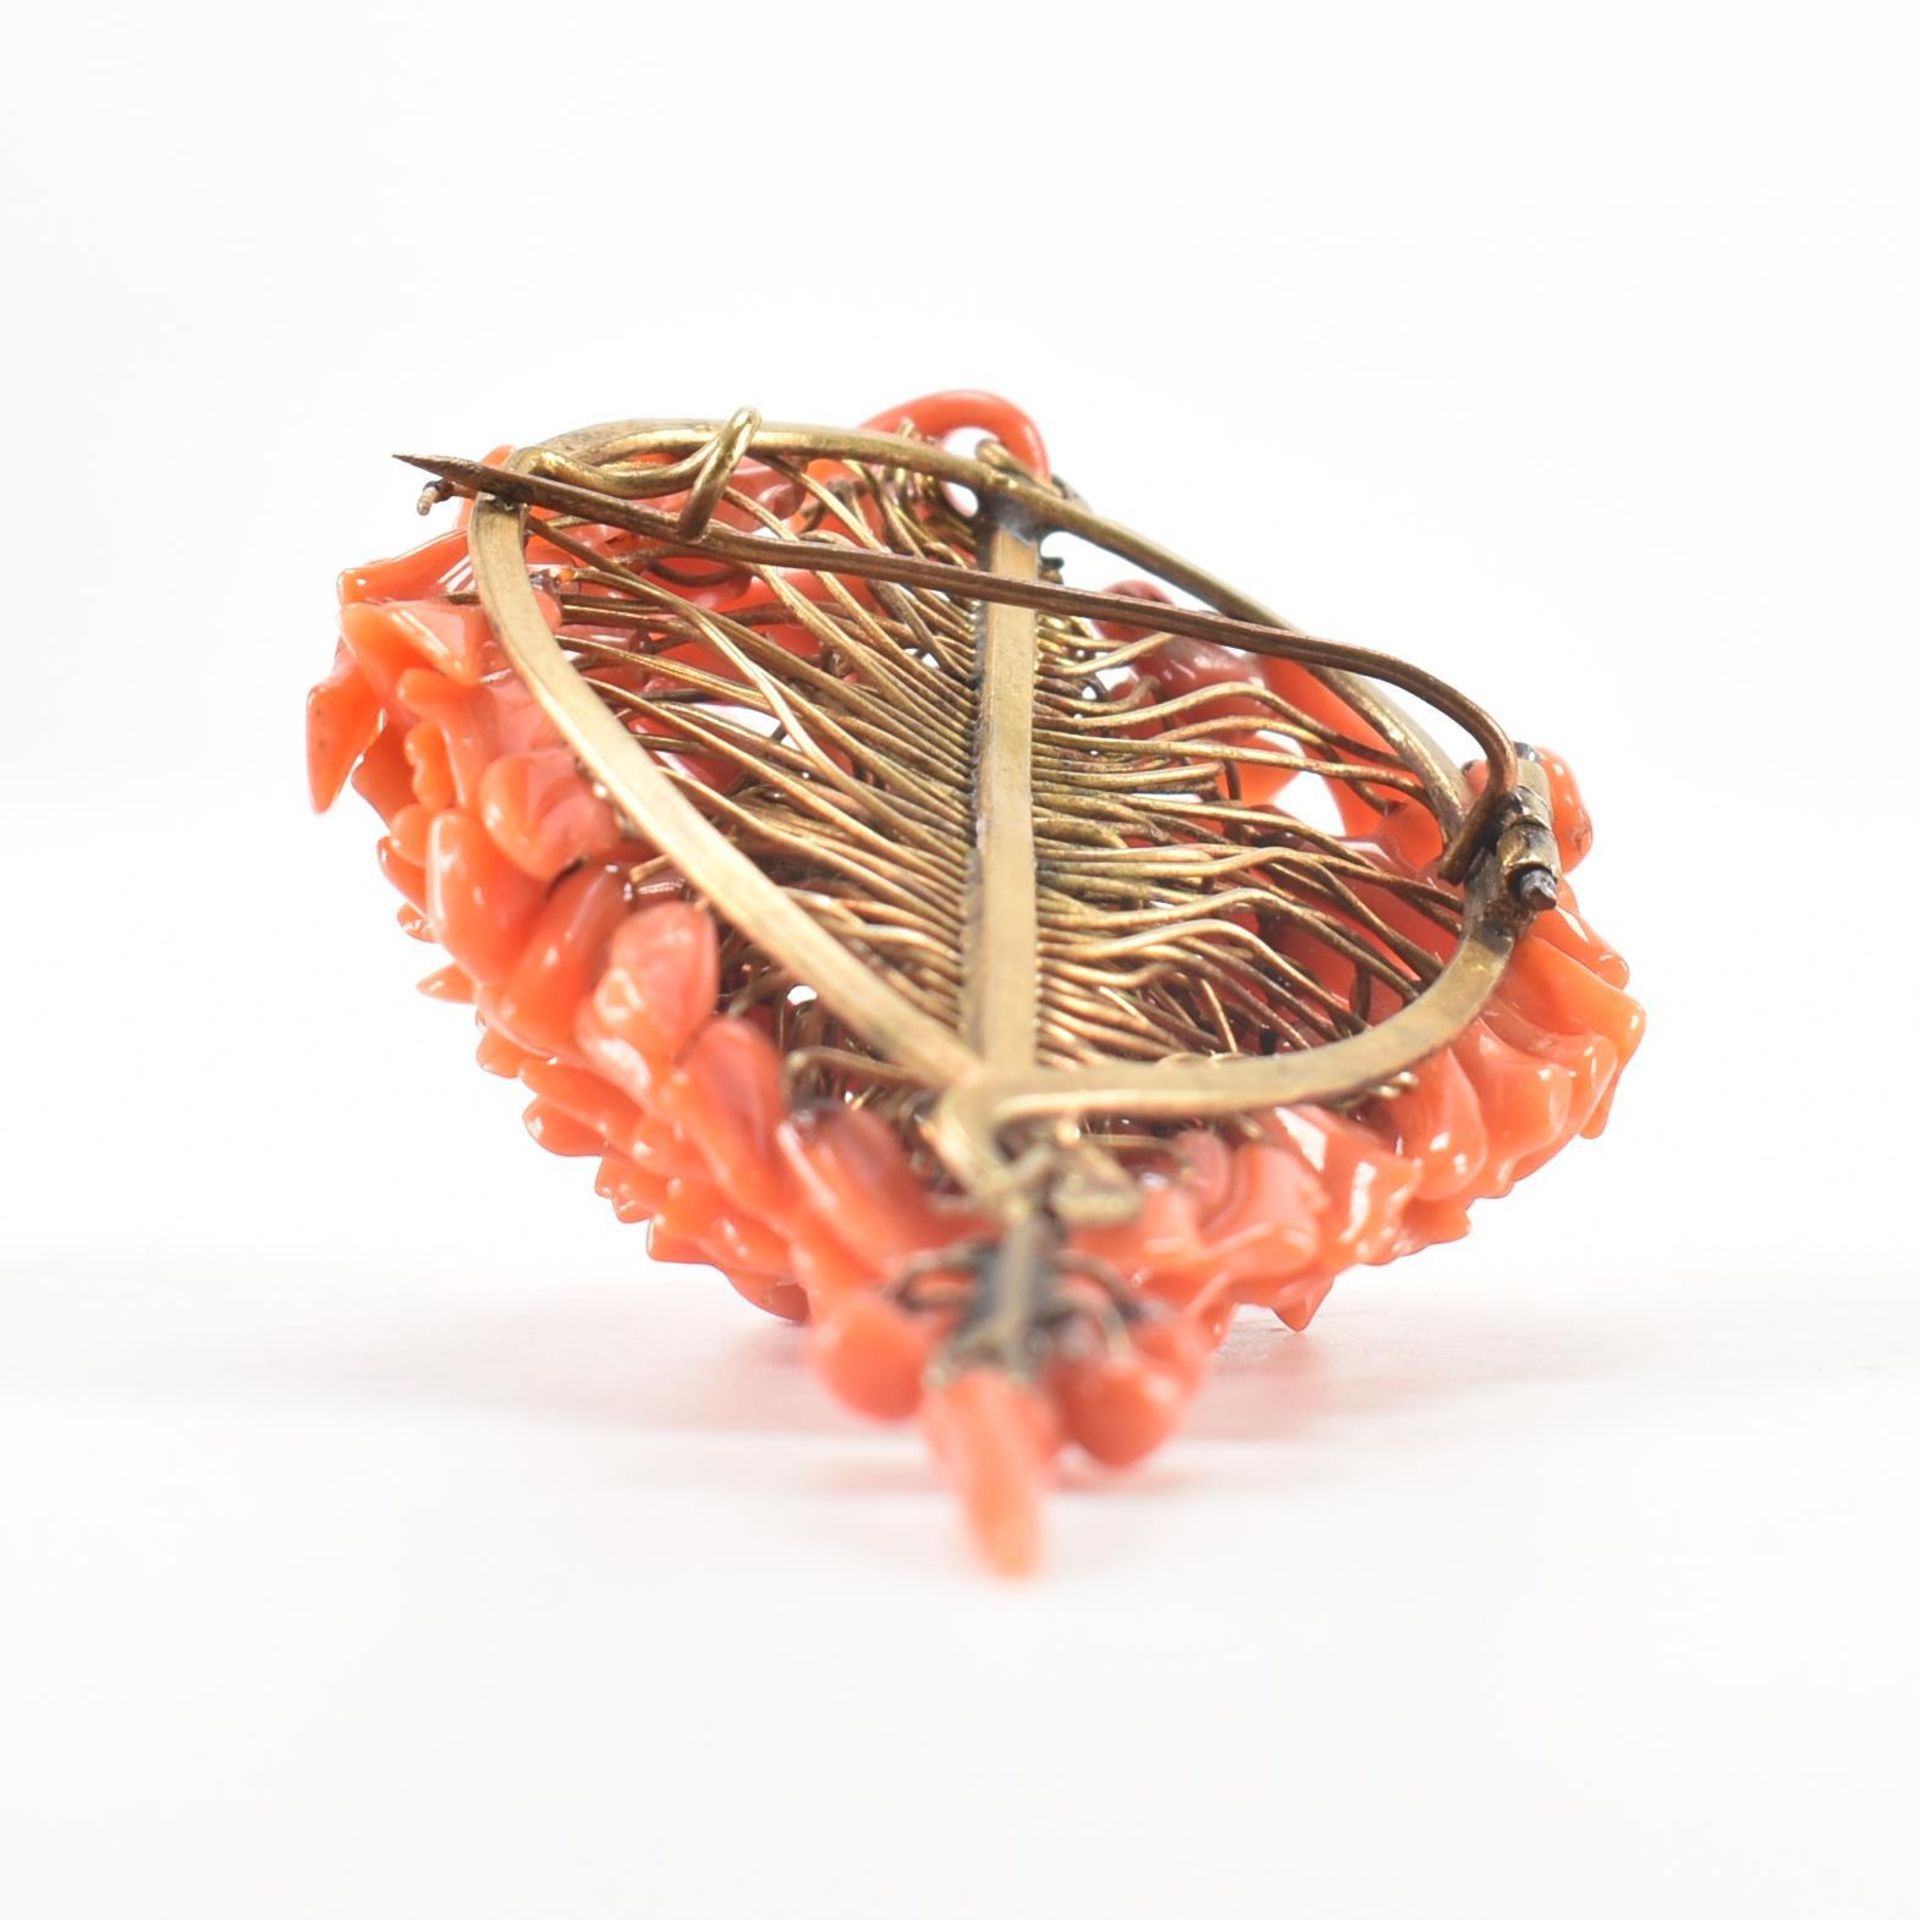 VICTORIAN GILT METAL & CORAL BROOCH - Image 3 of 6